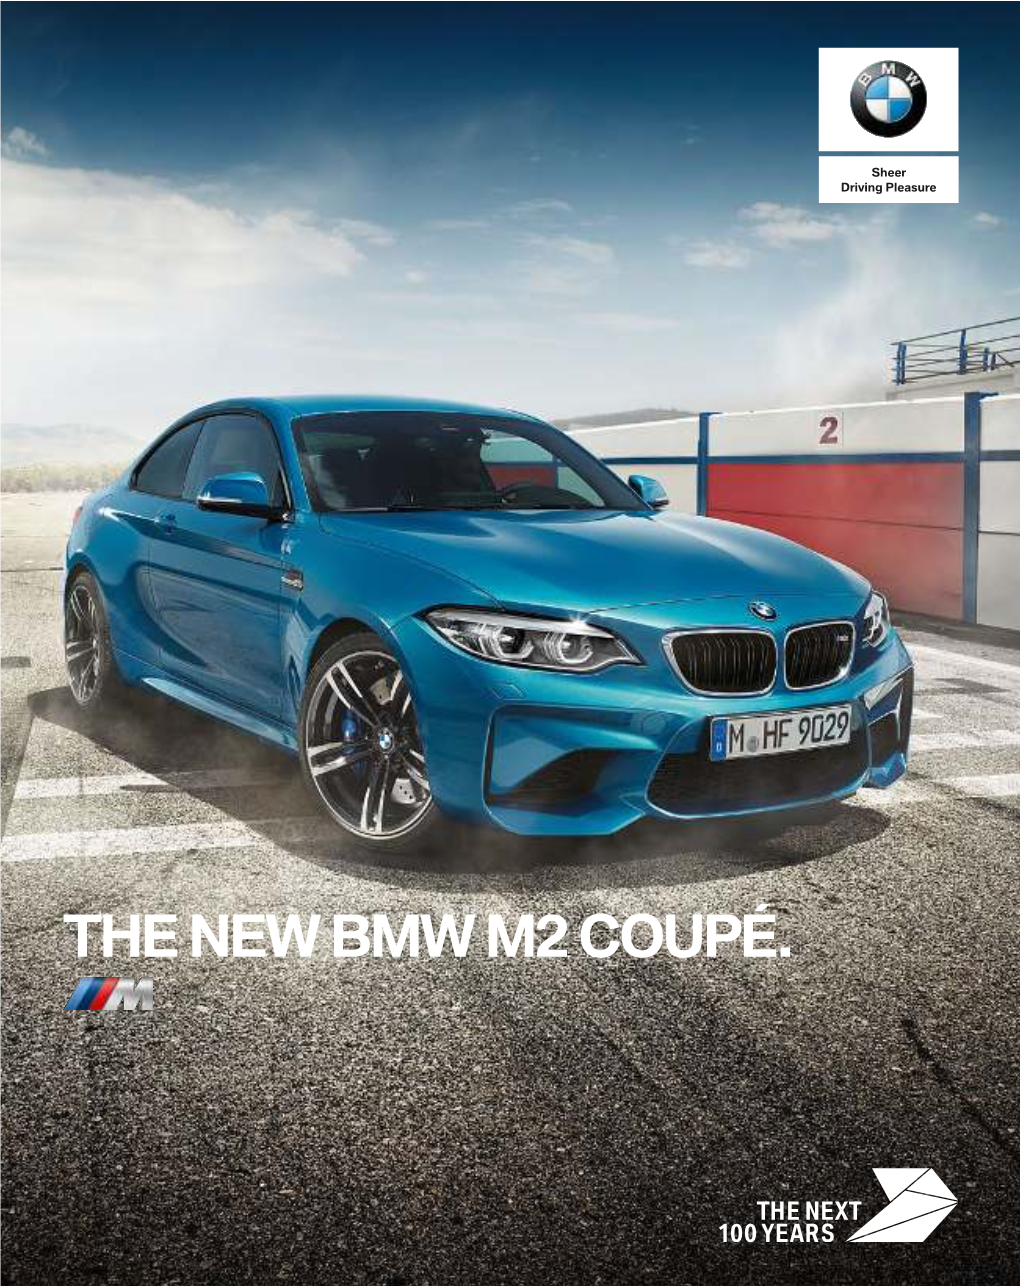 The New Bmw M2 Coupé. Small Wonder